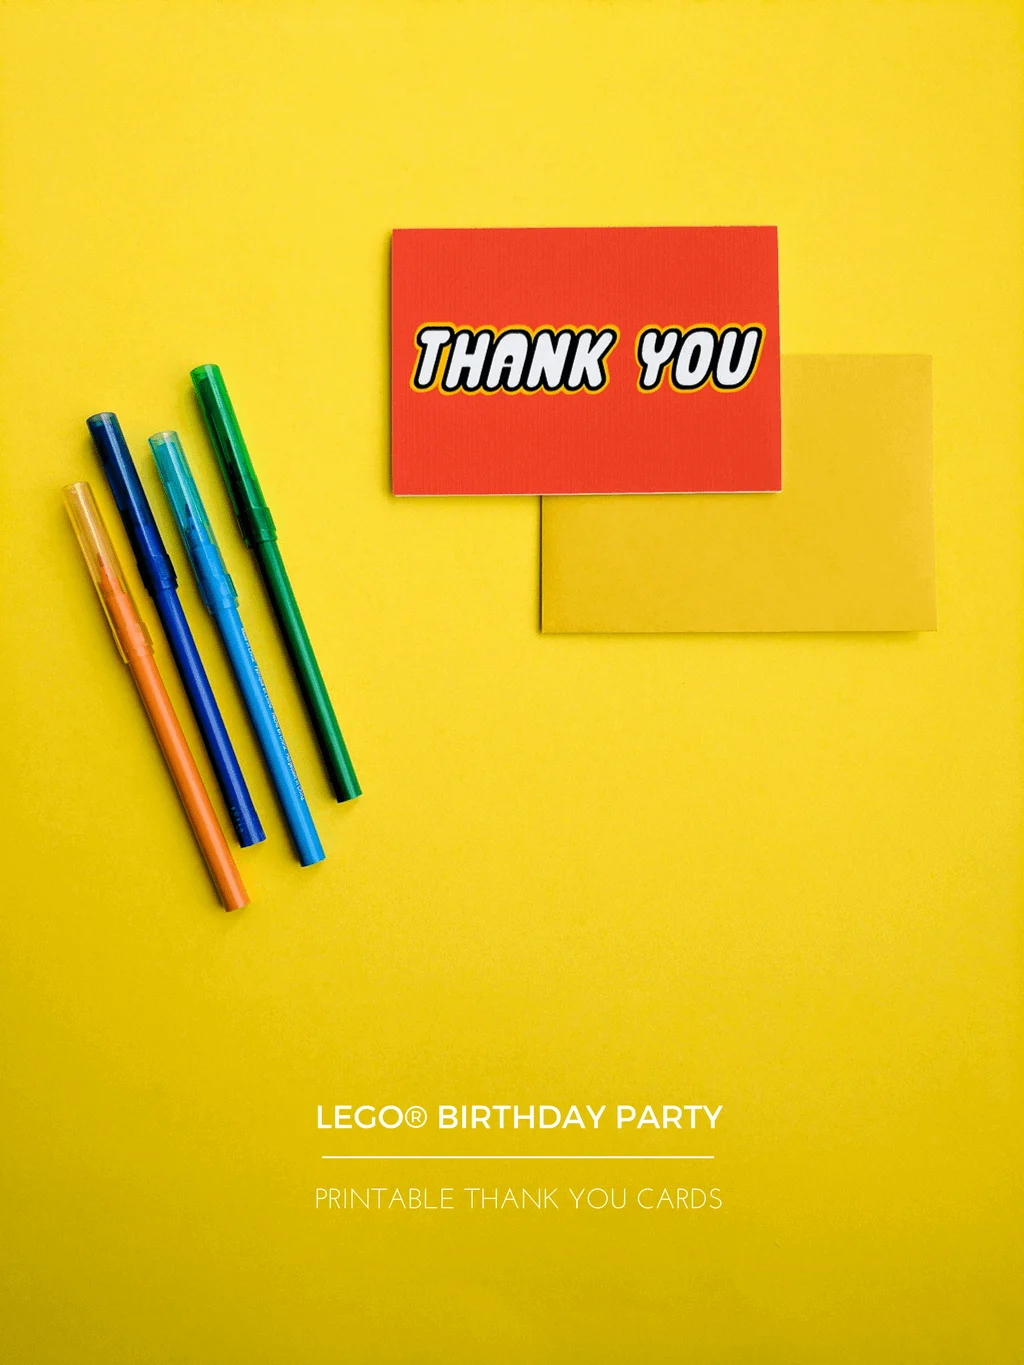 Free printable LEGO-inspired thank you cards. Just download, print and cut -- birthday kids can draw or write their own LEGO birthday party thank you notes inside.